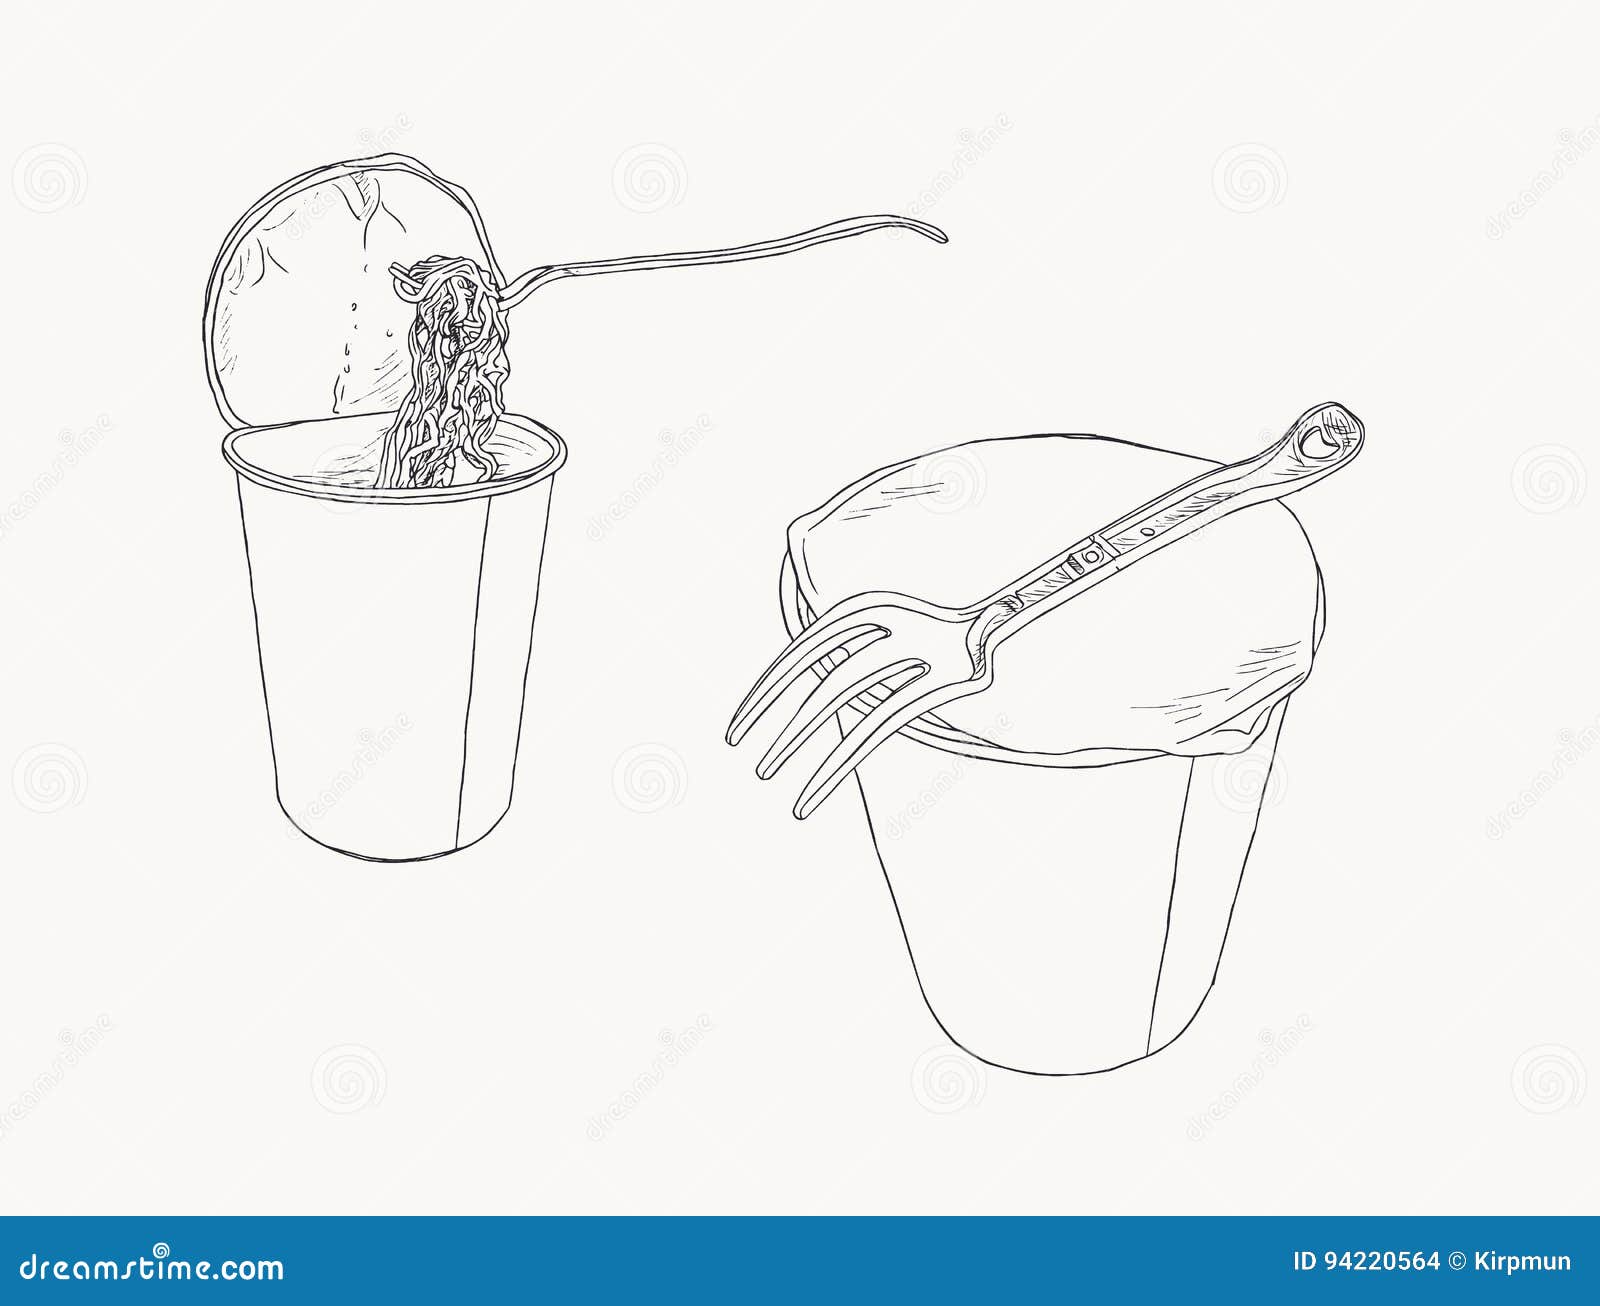 Instant Noodle In Cup Sketch Vector Set Stock Vector Illustration Of Flavor Cook 94220564 See more ideas about homemade noodles, drawings, art. dreamstime com